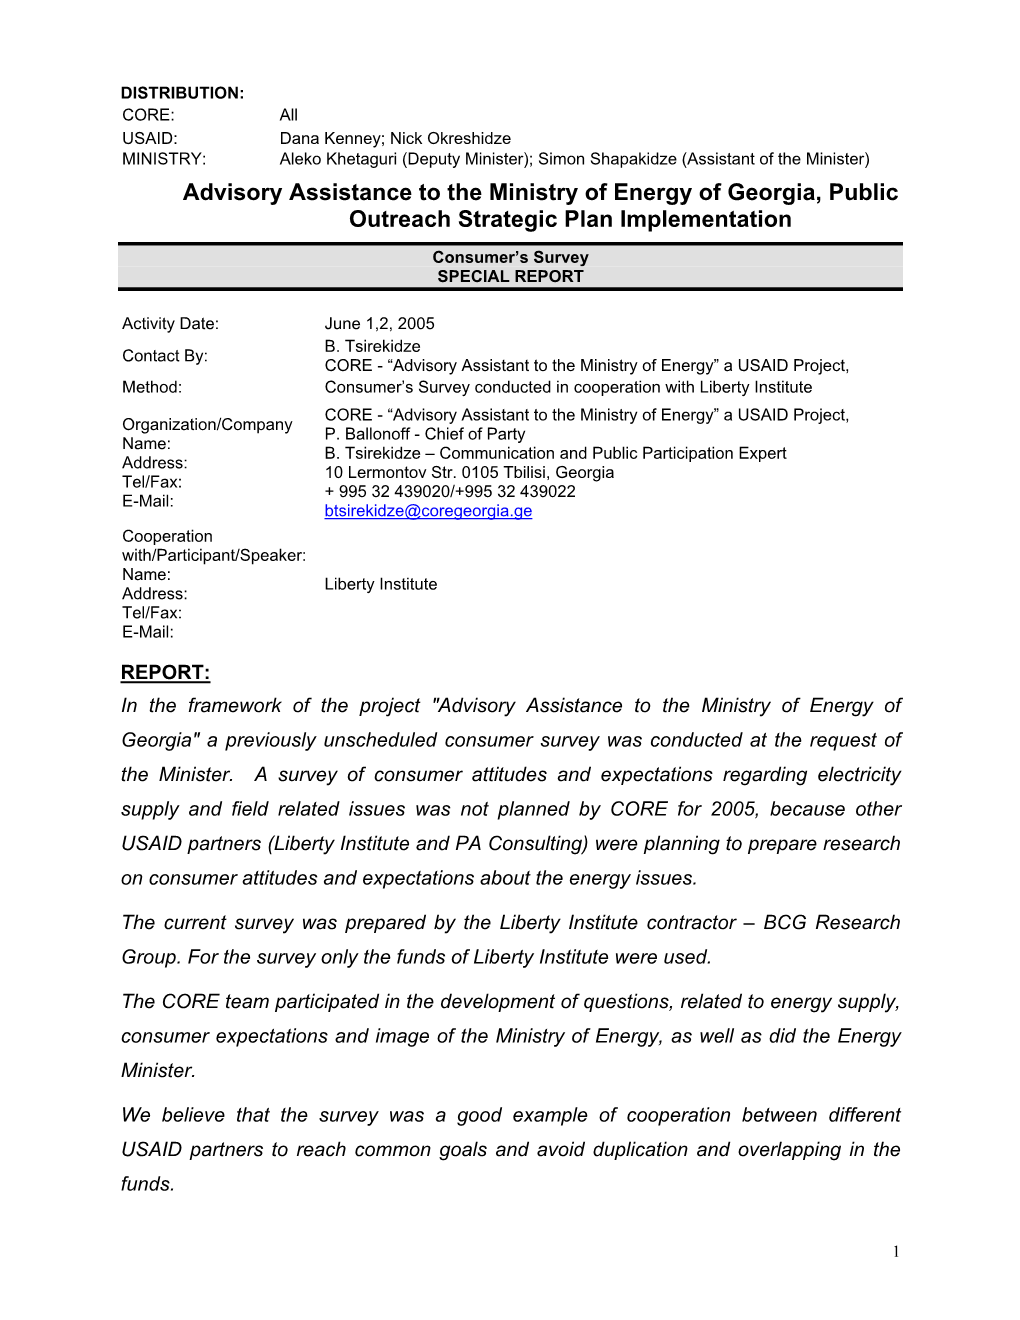 Advisory Assistance to the Ministry of Energy of Georgia, Public Outreach Strategic Plan Implementation